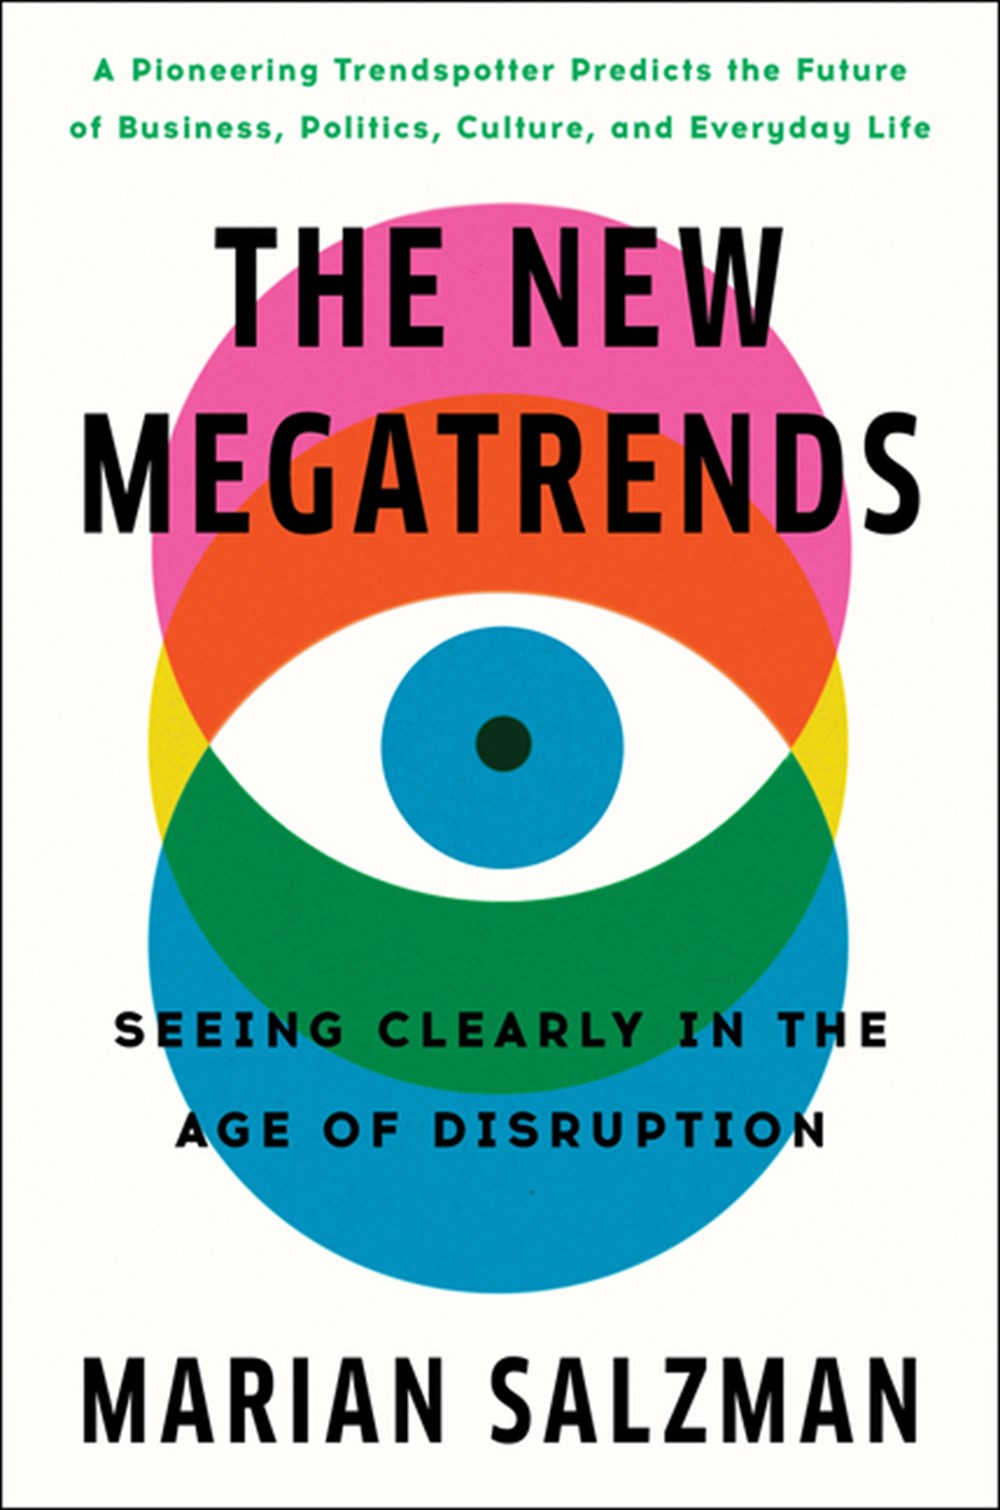 New Megatrends Seeing Clearly in the Age of Disruption